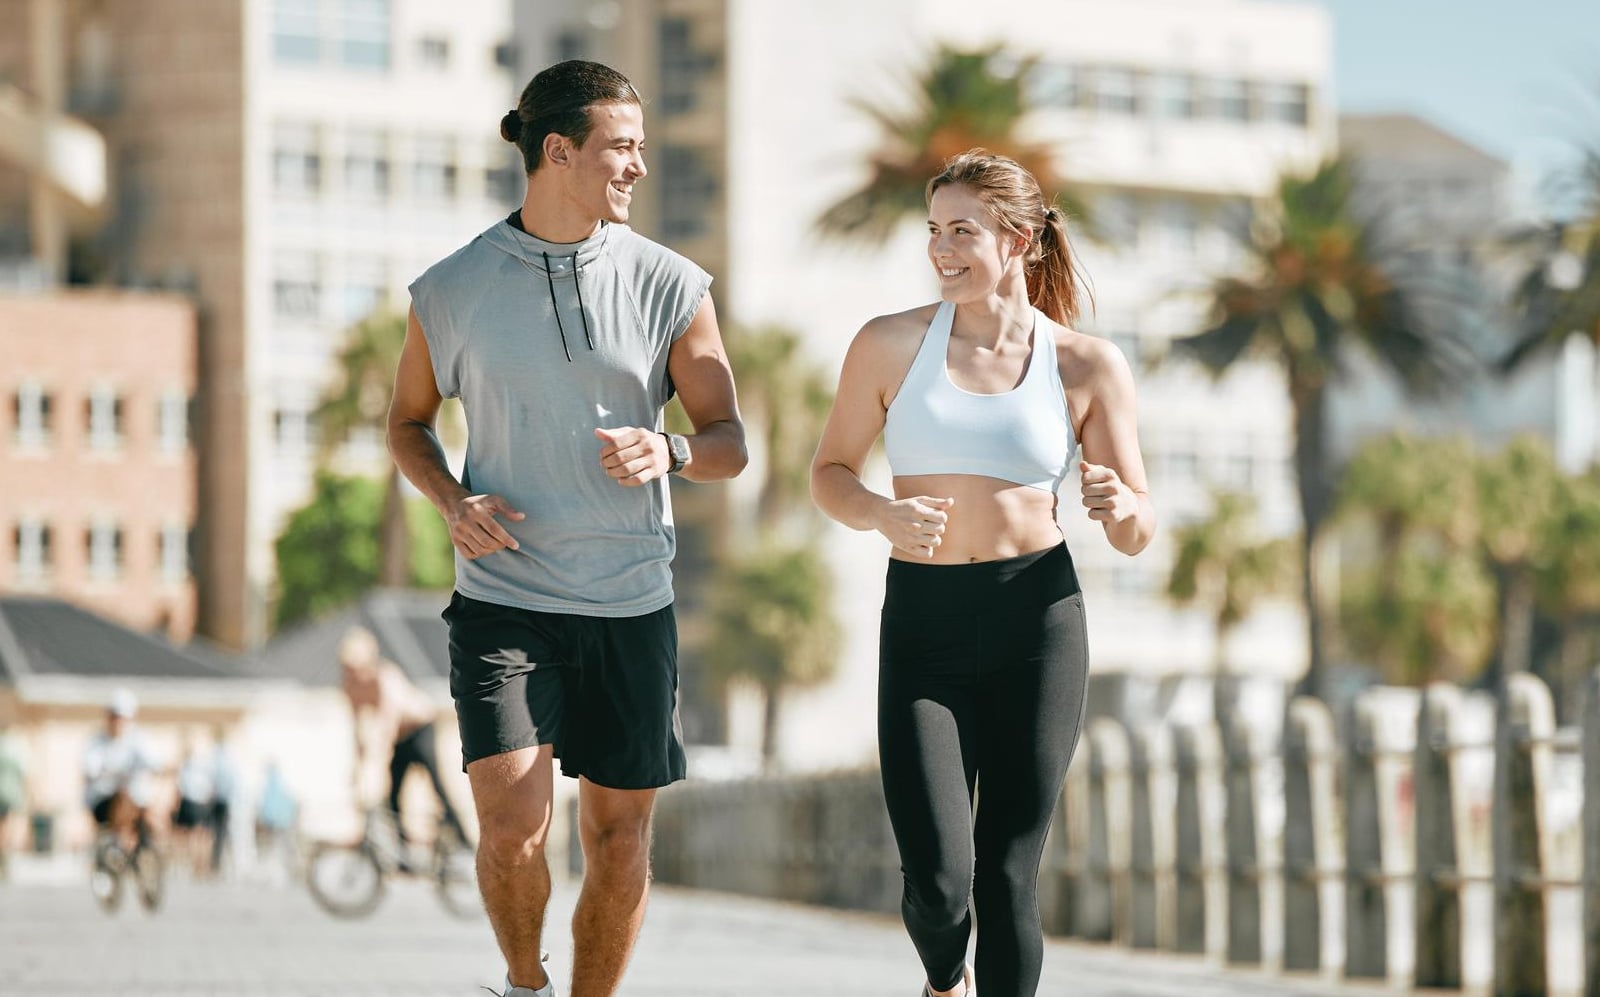 Running 30 Minutes A Day: The Benefits And Effects